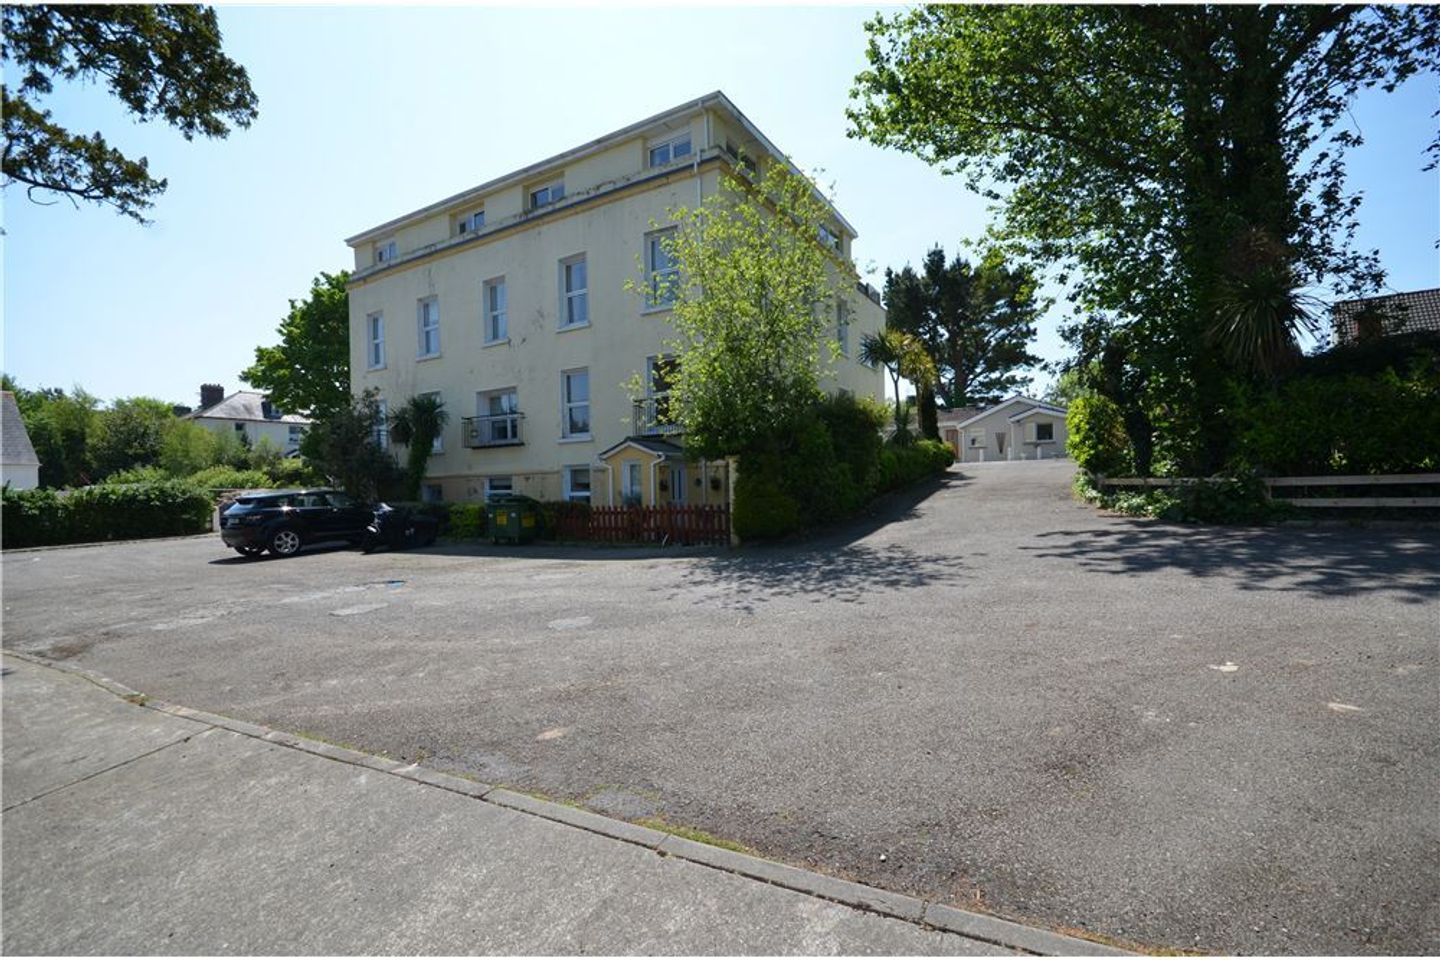 Apartment 1, Newtown Park House, Waterford City, Co. Waterford, X91N973